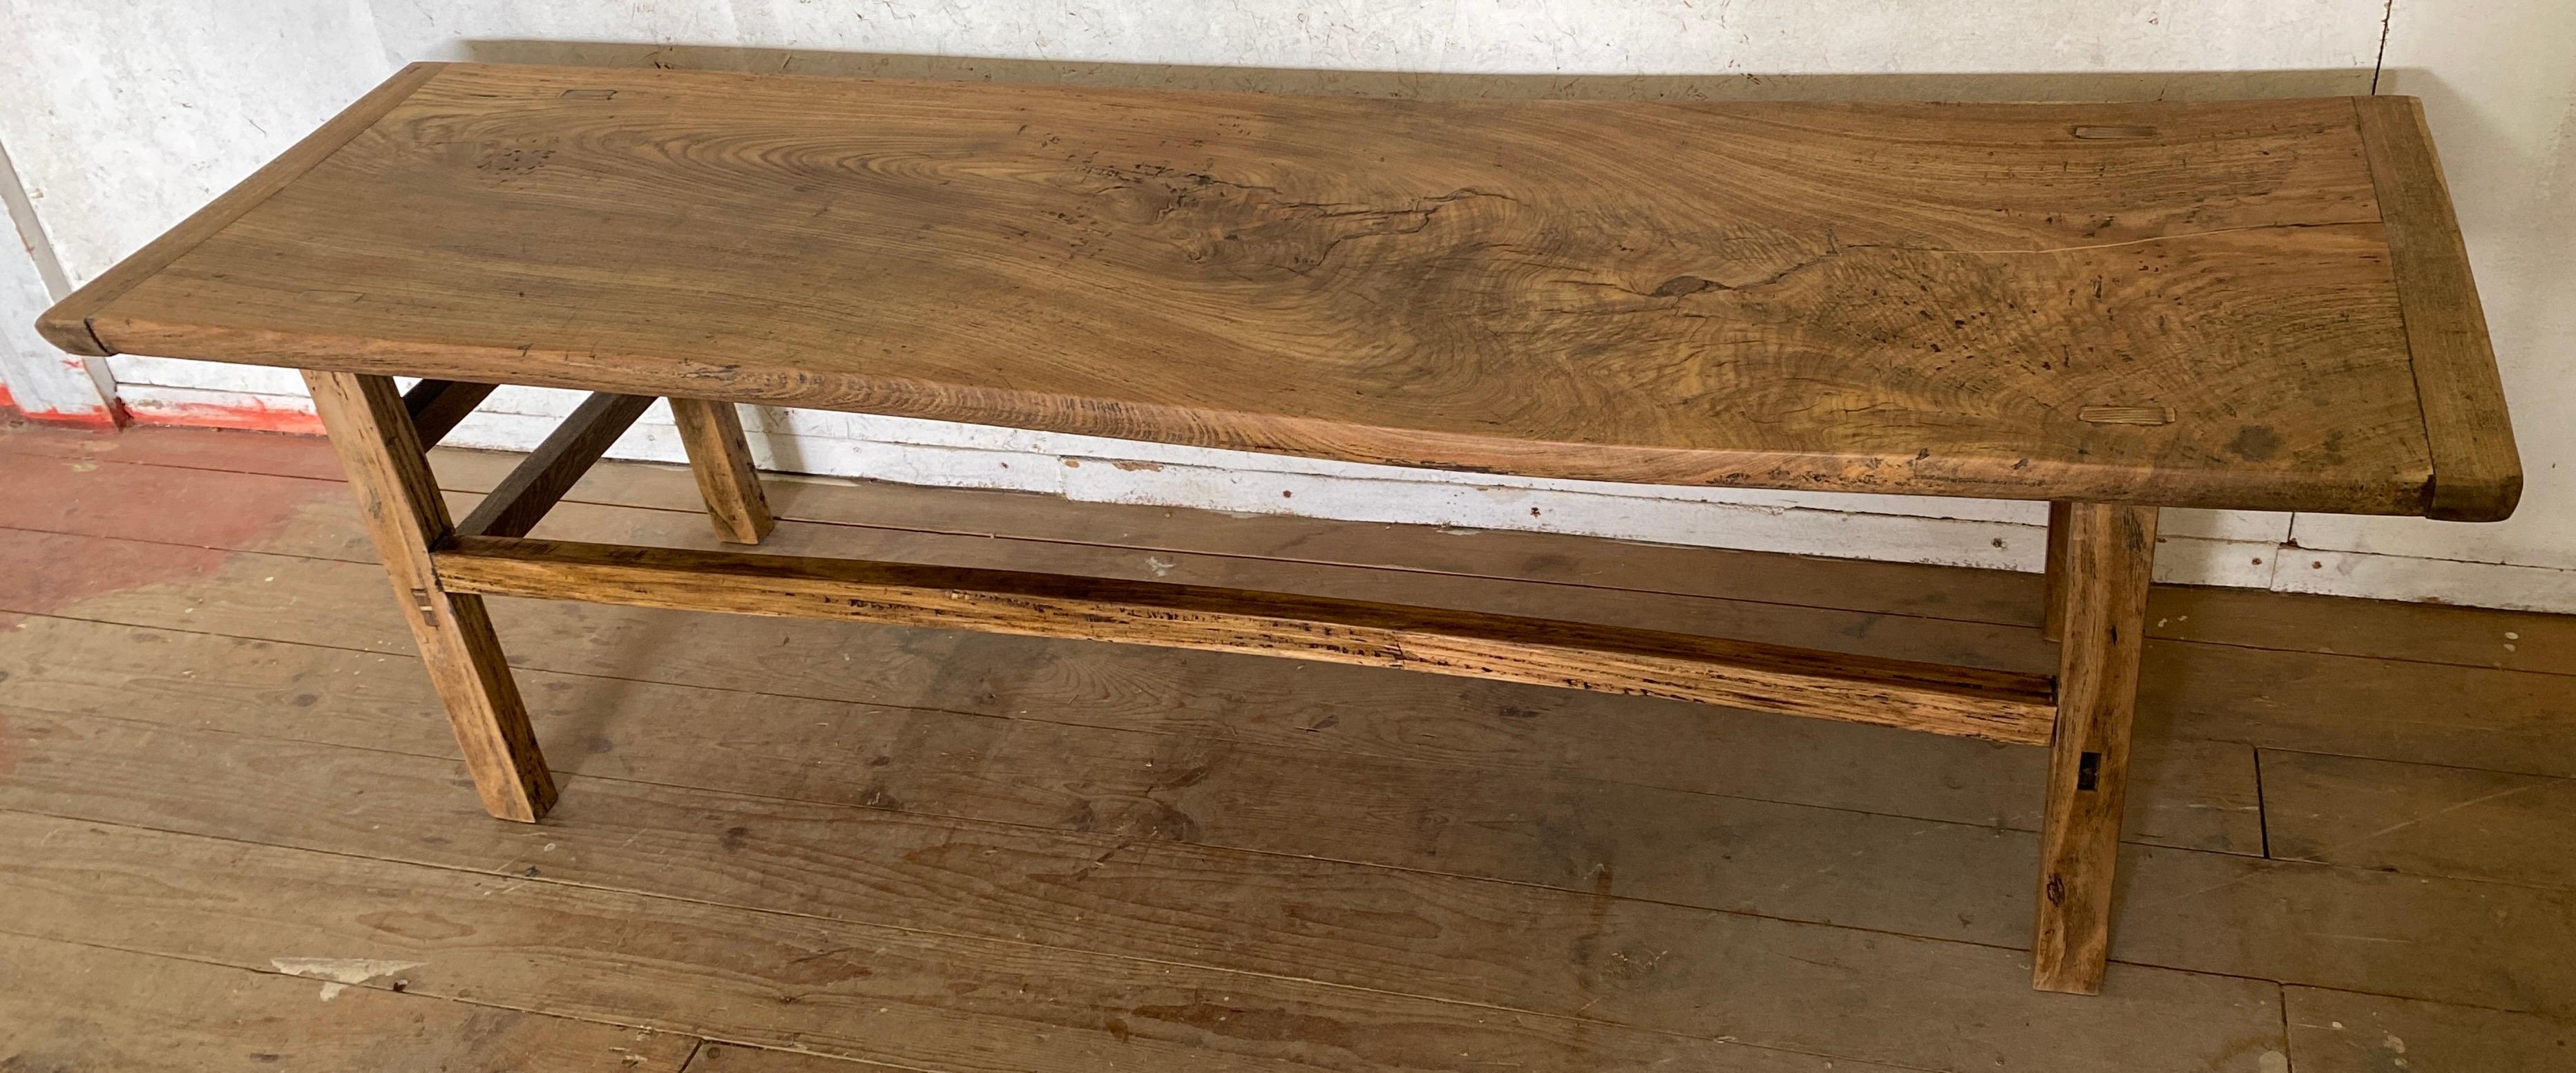 Teak Rustic Asian Plank Top Coffee Table or Bench For Sale